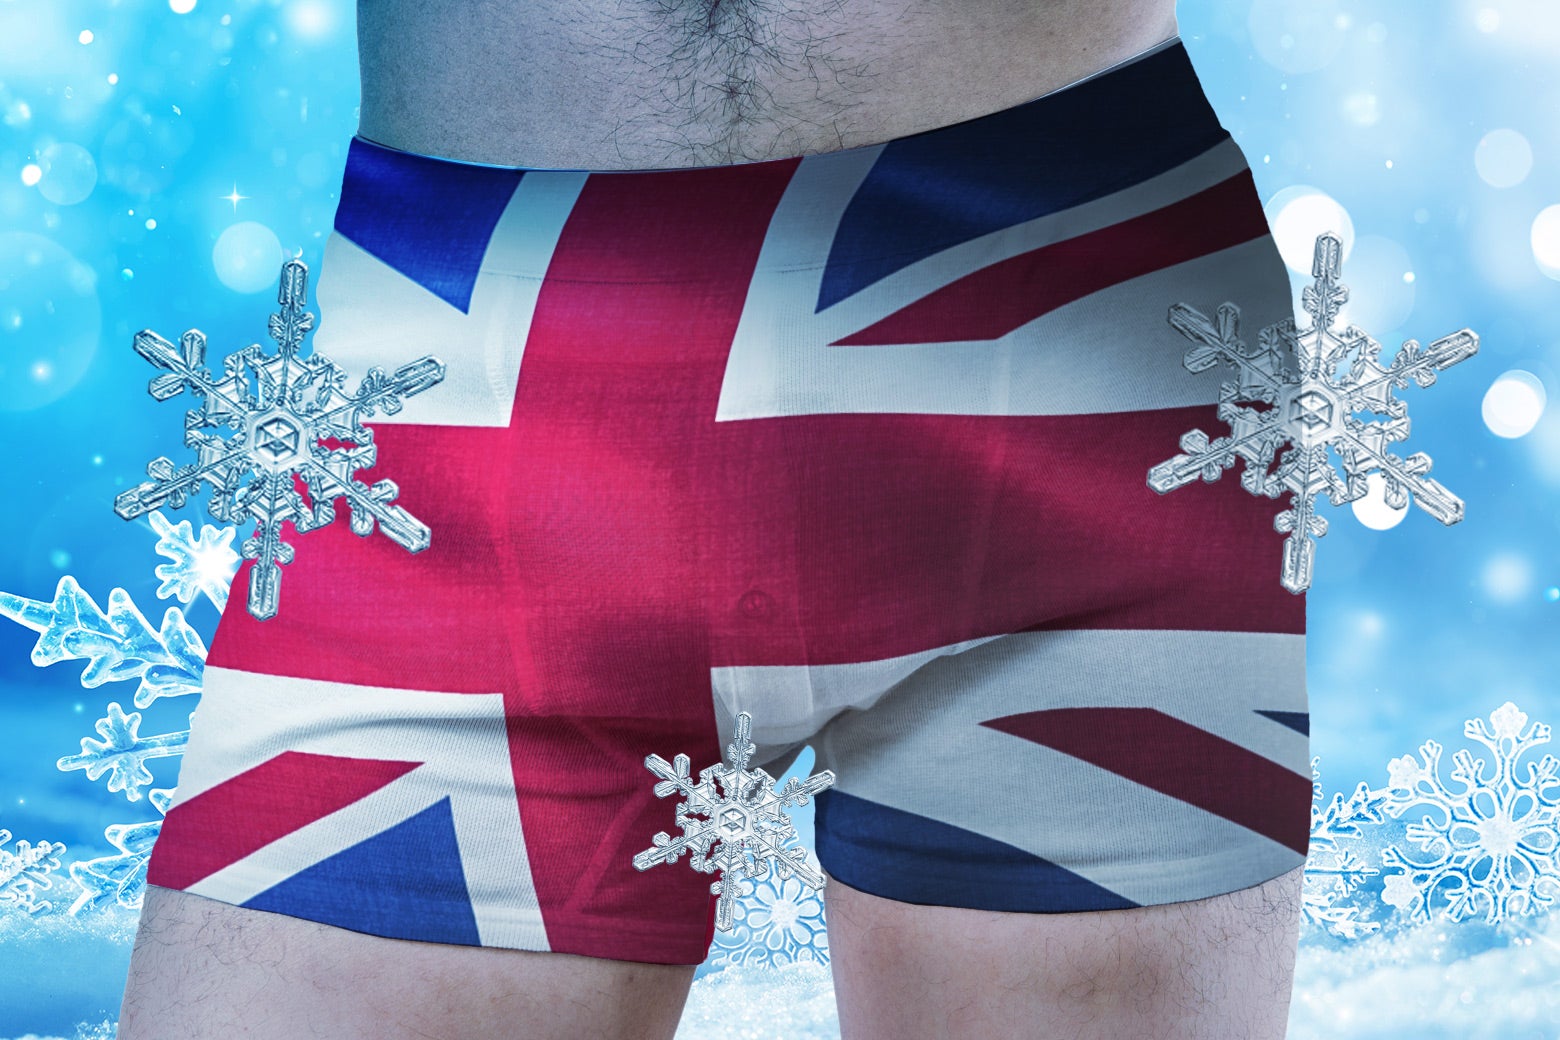 A man as seen from the hips, wearing Union Jack–patterned boxers, surrounded by snowflakes and other signs of cold.